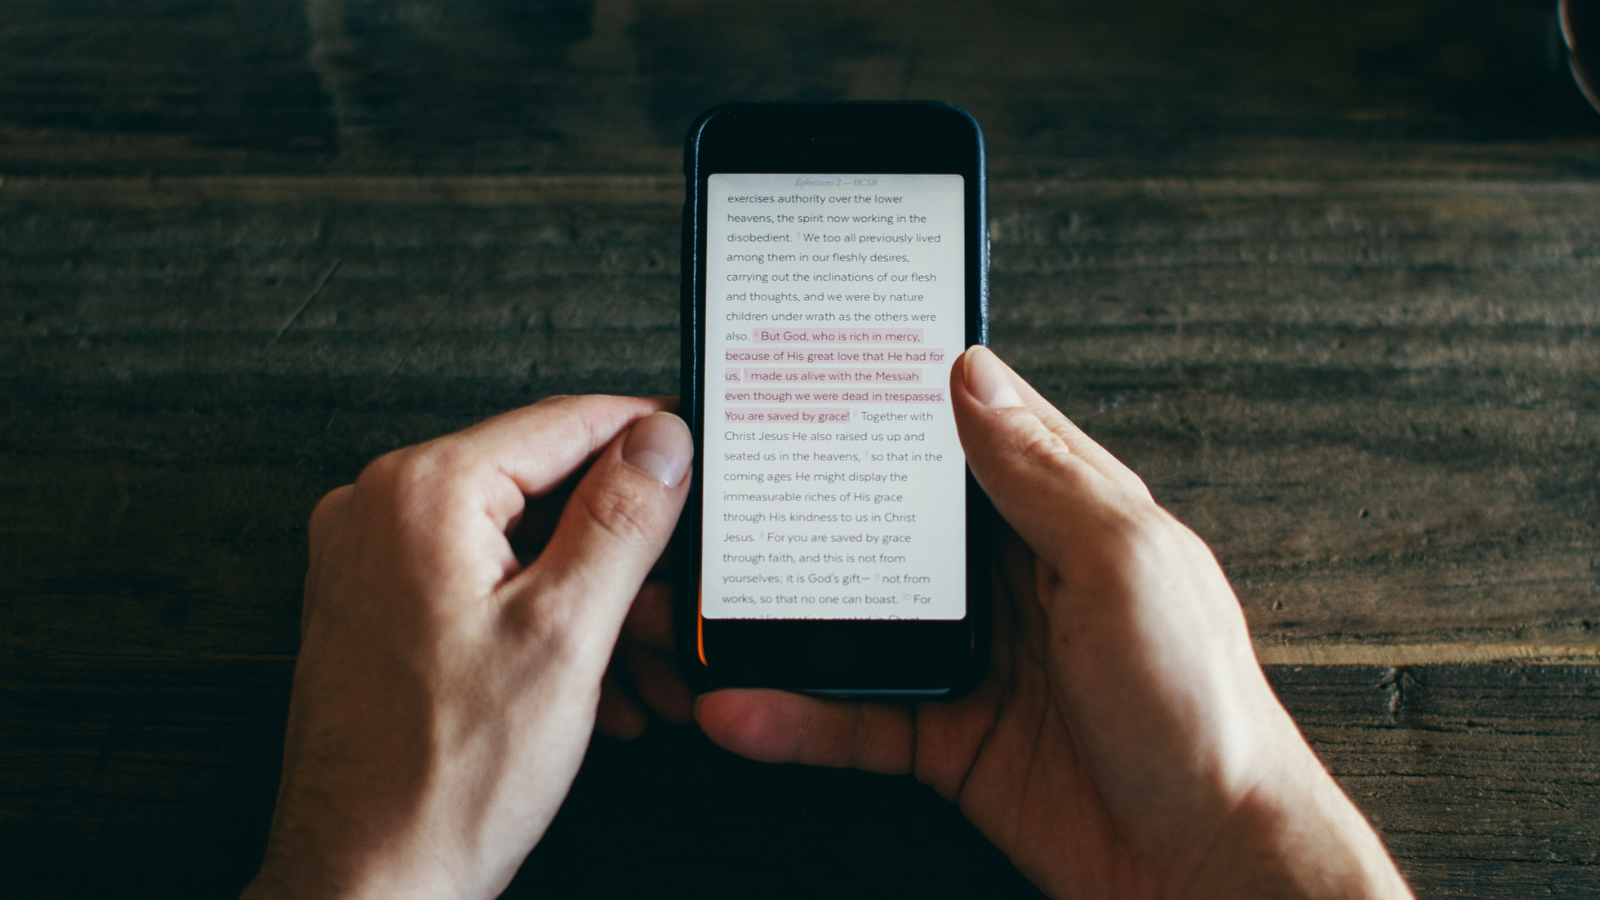 Hands holding a phone with scripture text on the screen.